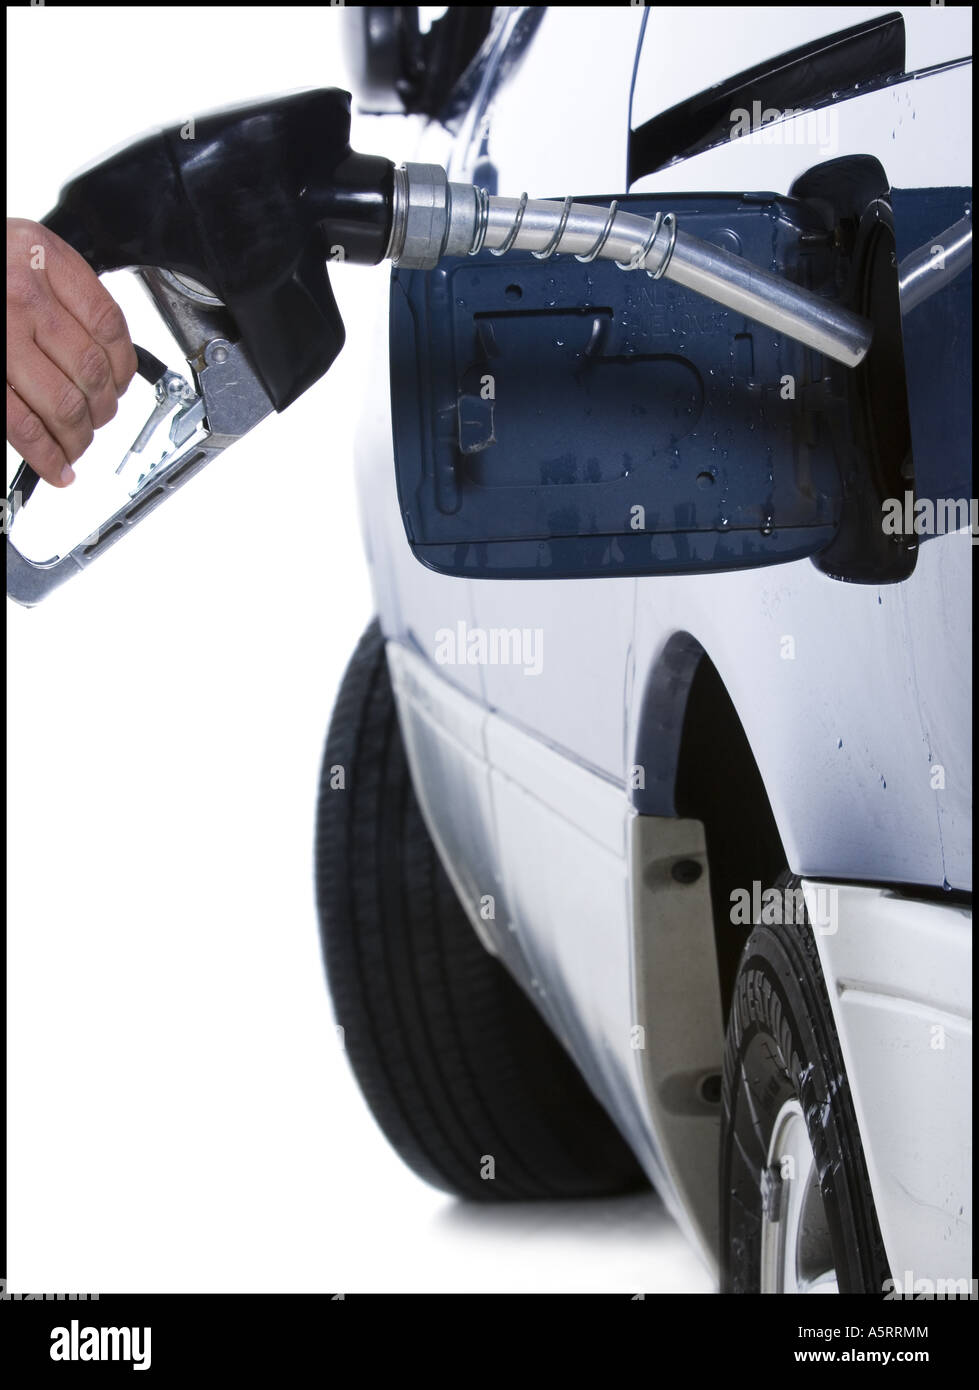 Filling up gas tank Stock Photo